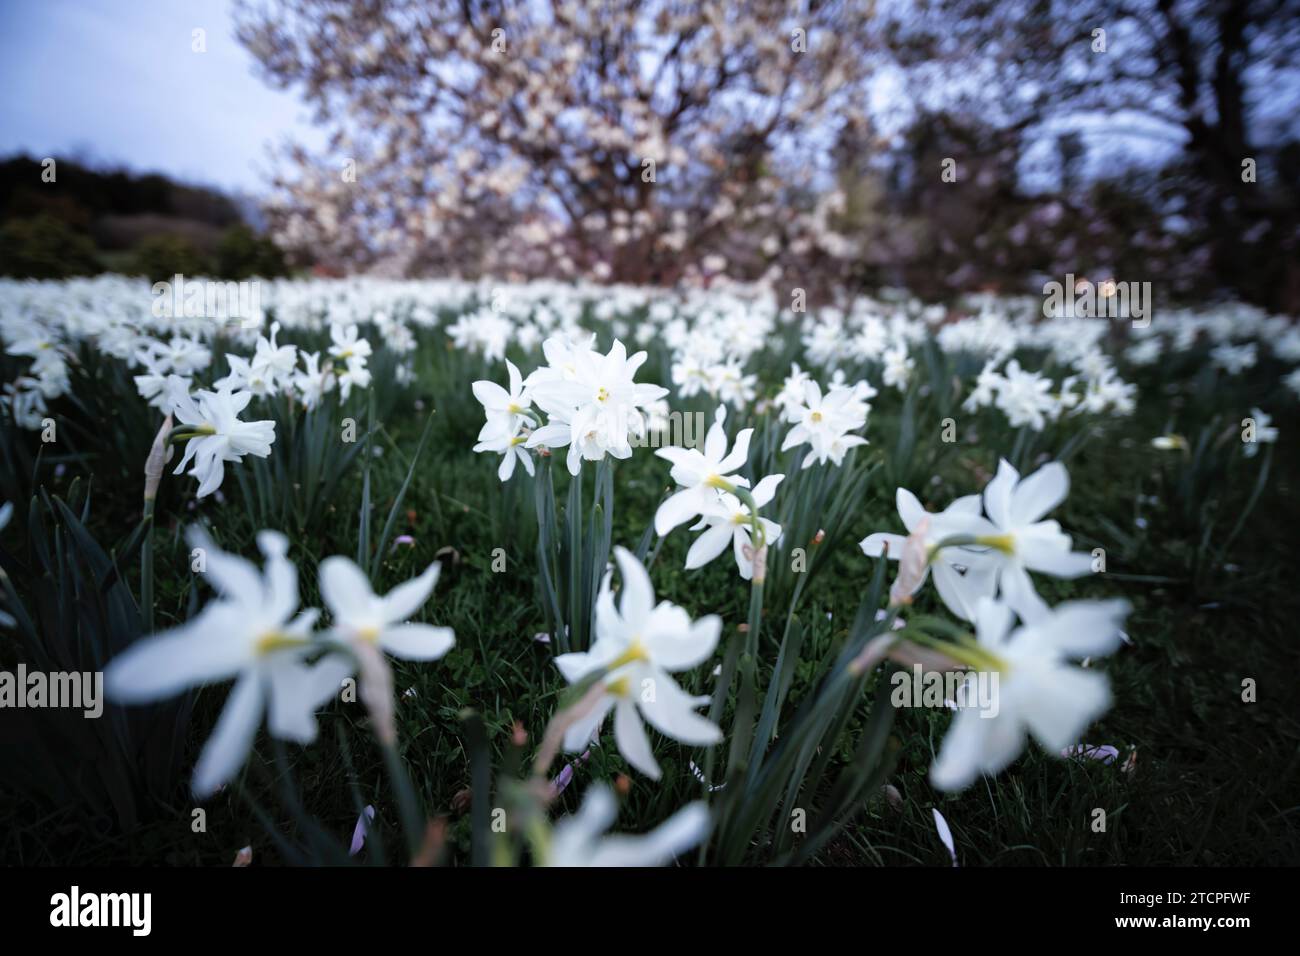 Low Angle View of White Daffodil Flowers in a Garden During Spring Bloom, New Jersey, USA Stock Photo